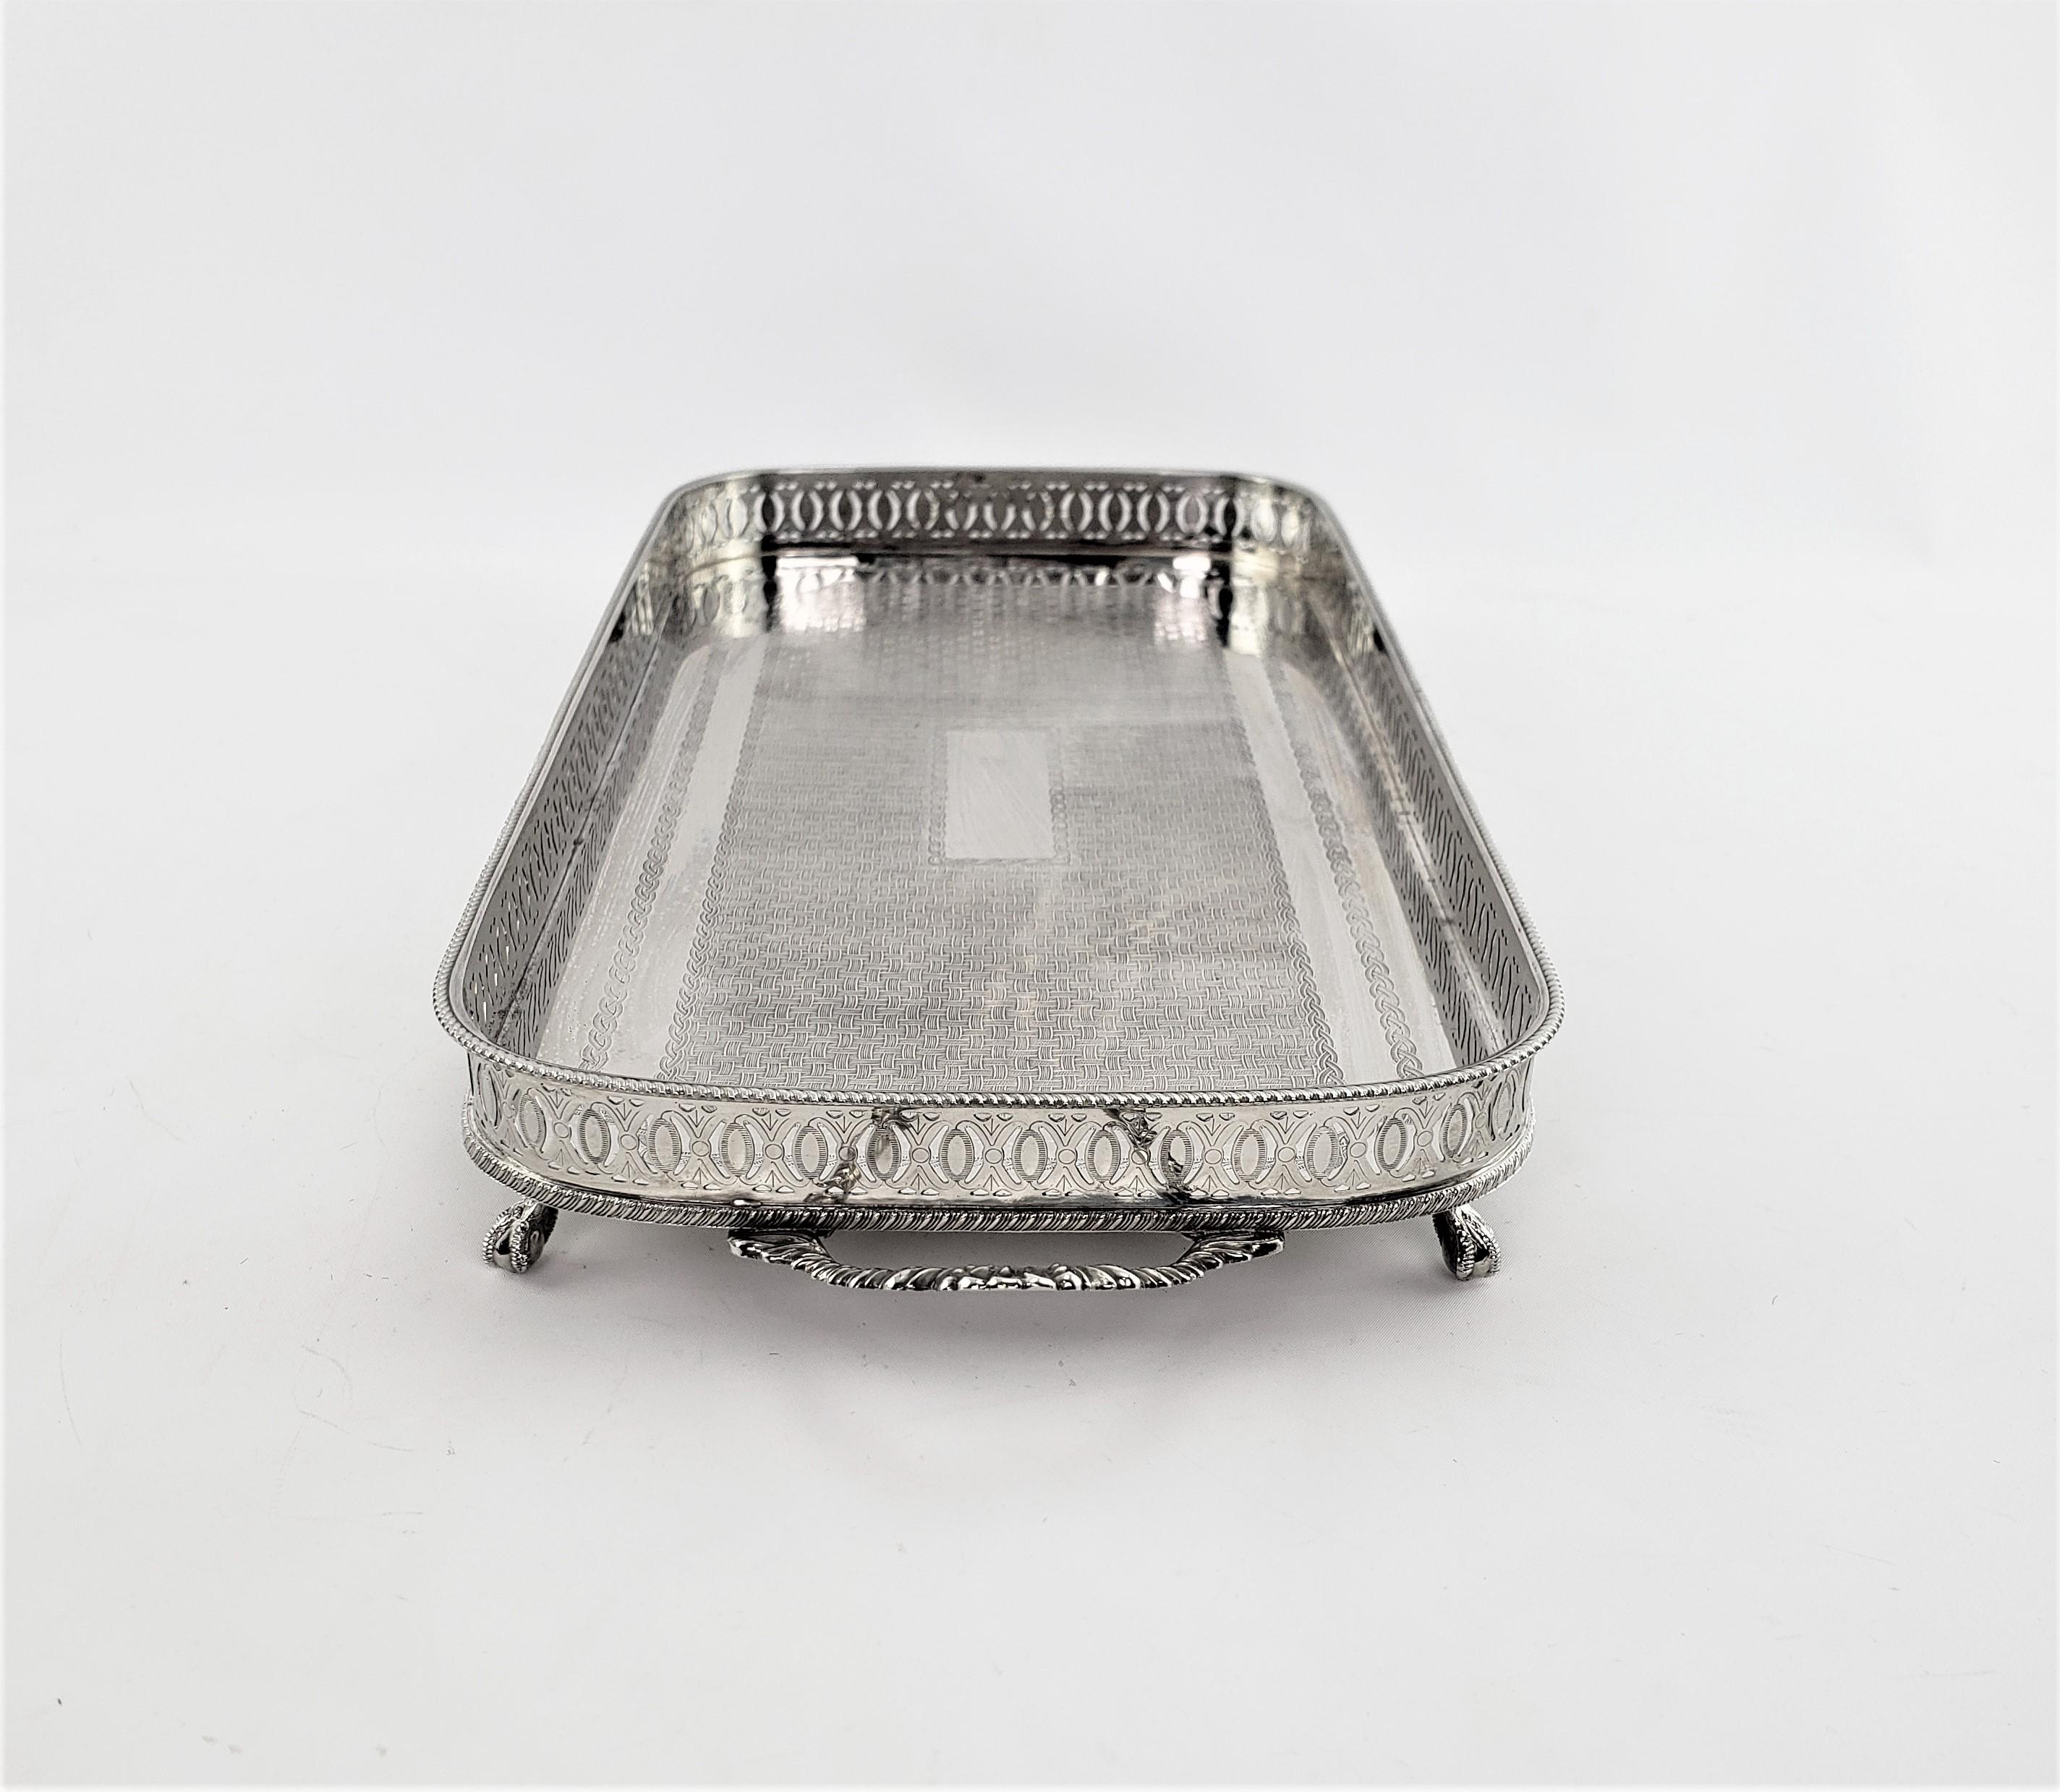 Edwardian Antique English Silver Plated Gallery Serving Tray with Engraved Weave Decor For Sale